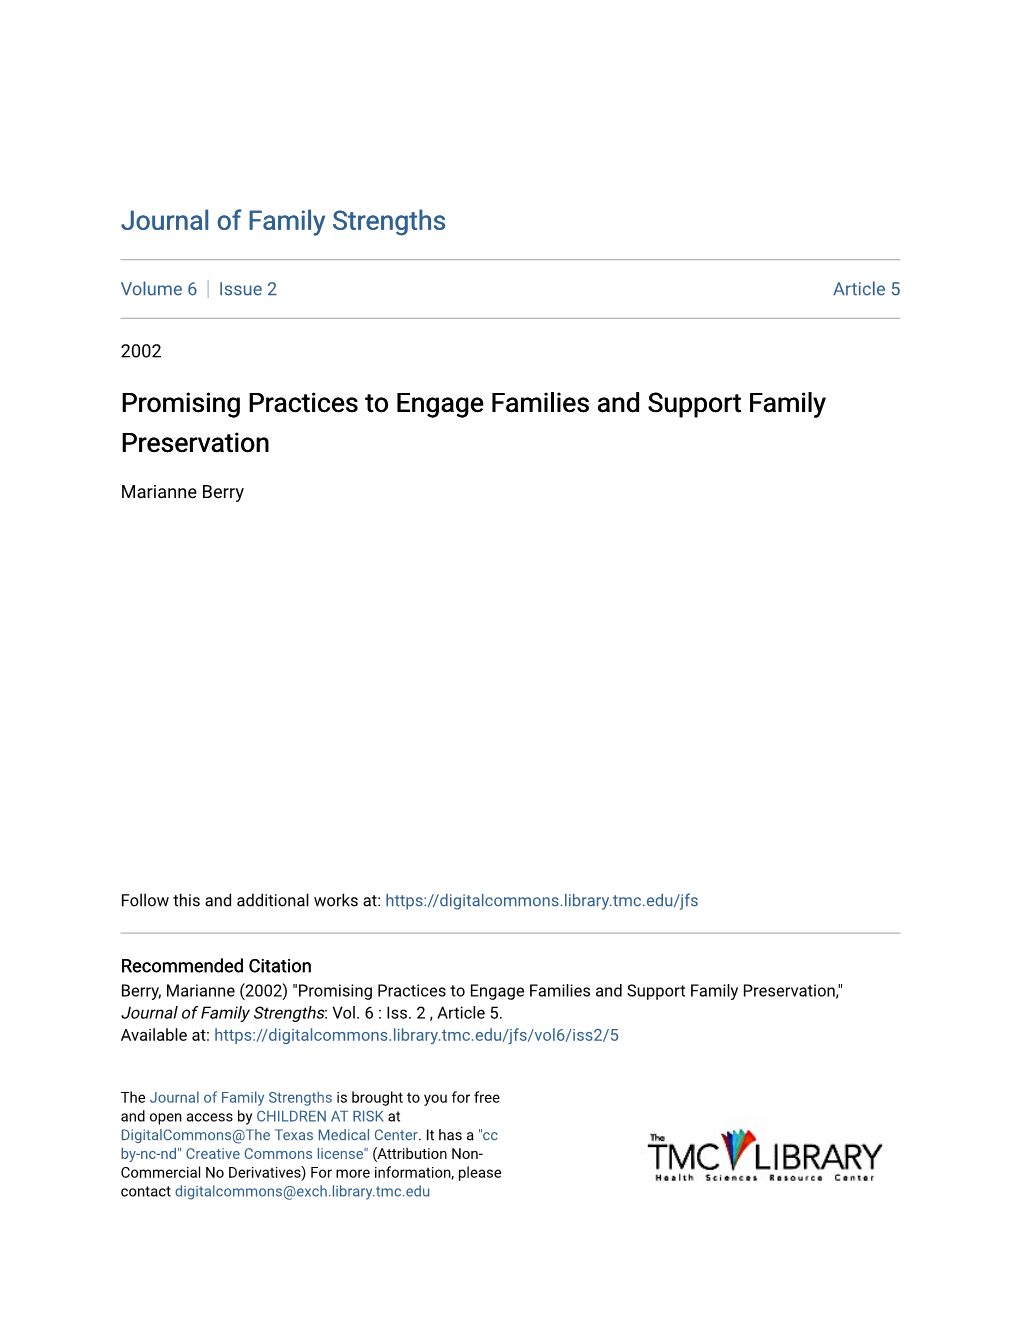 Promising Practices to Engage Families and Support Family Preservation